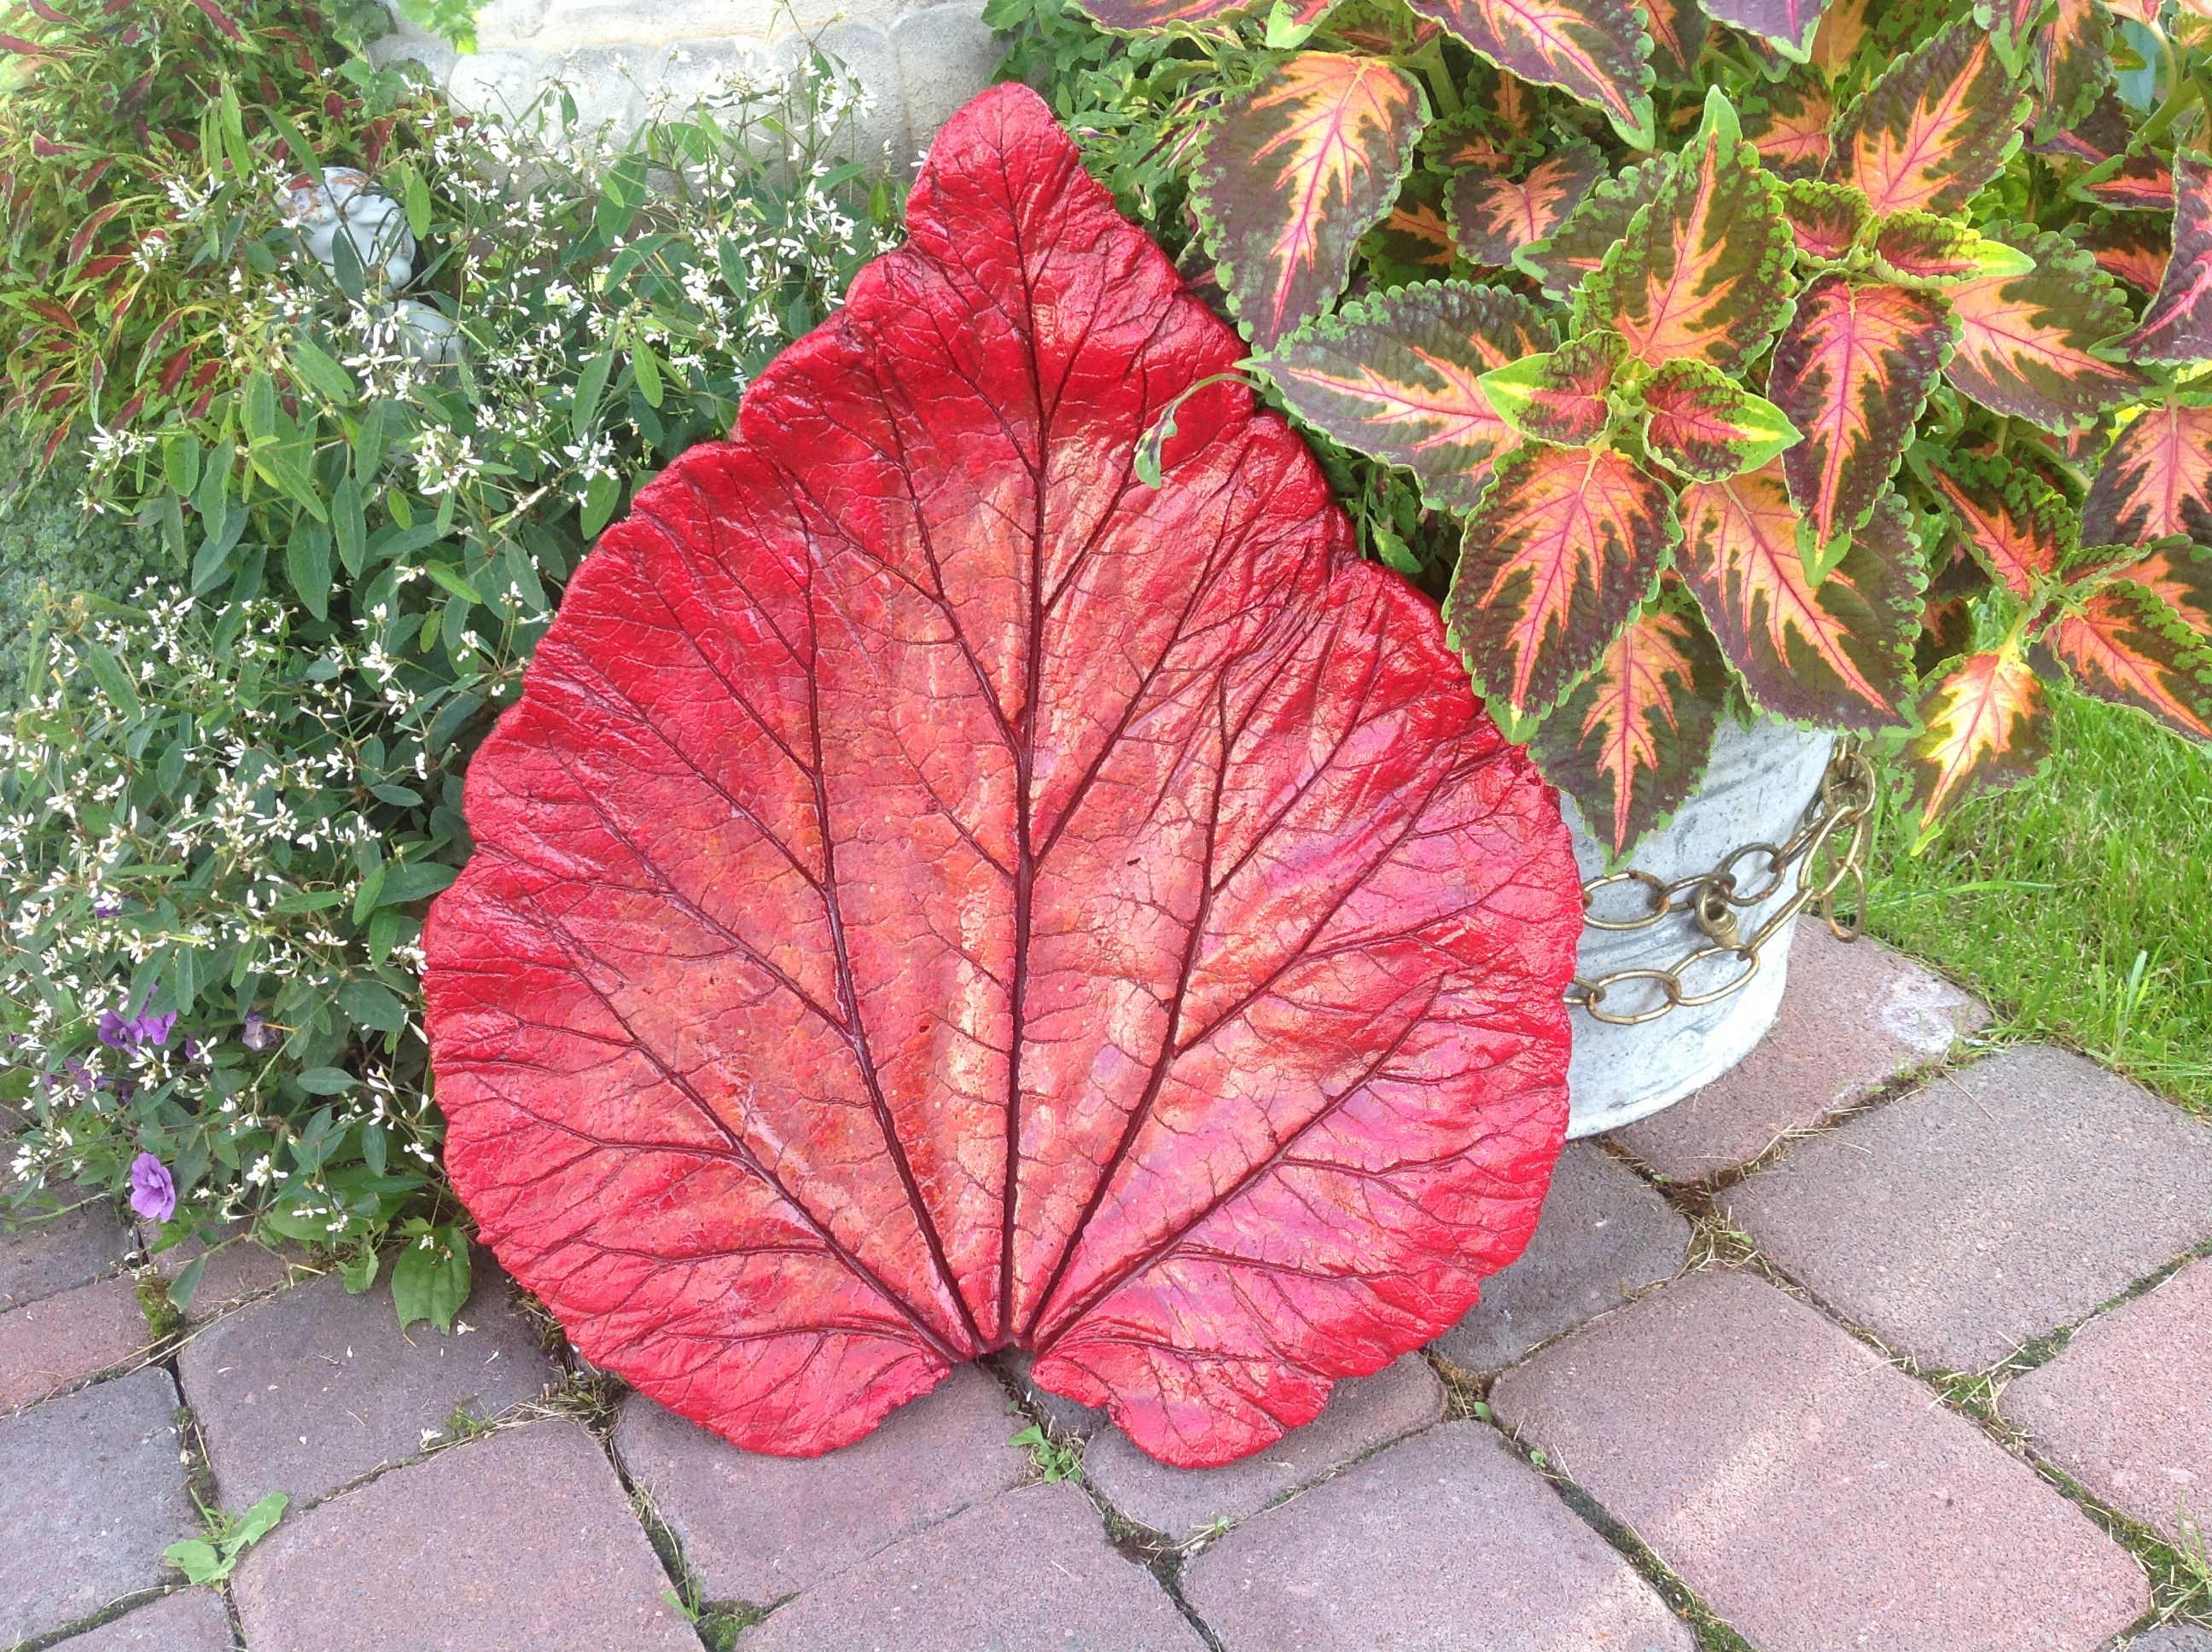 Concrete rhubarb leaf - bright red and yellow centre. BEAUTIFUL ...